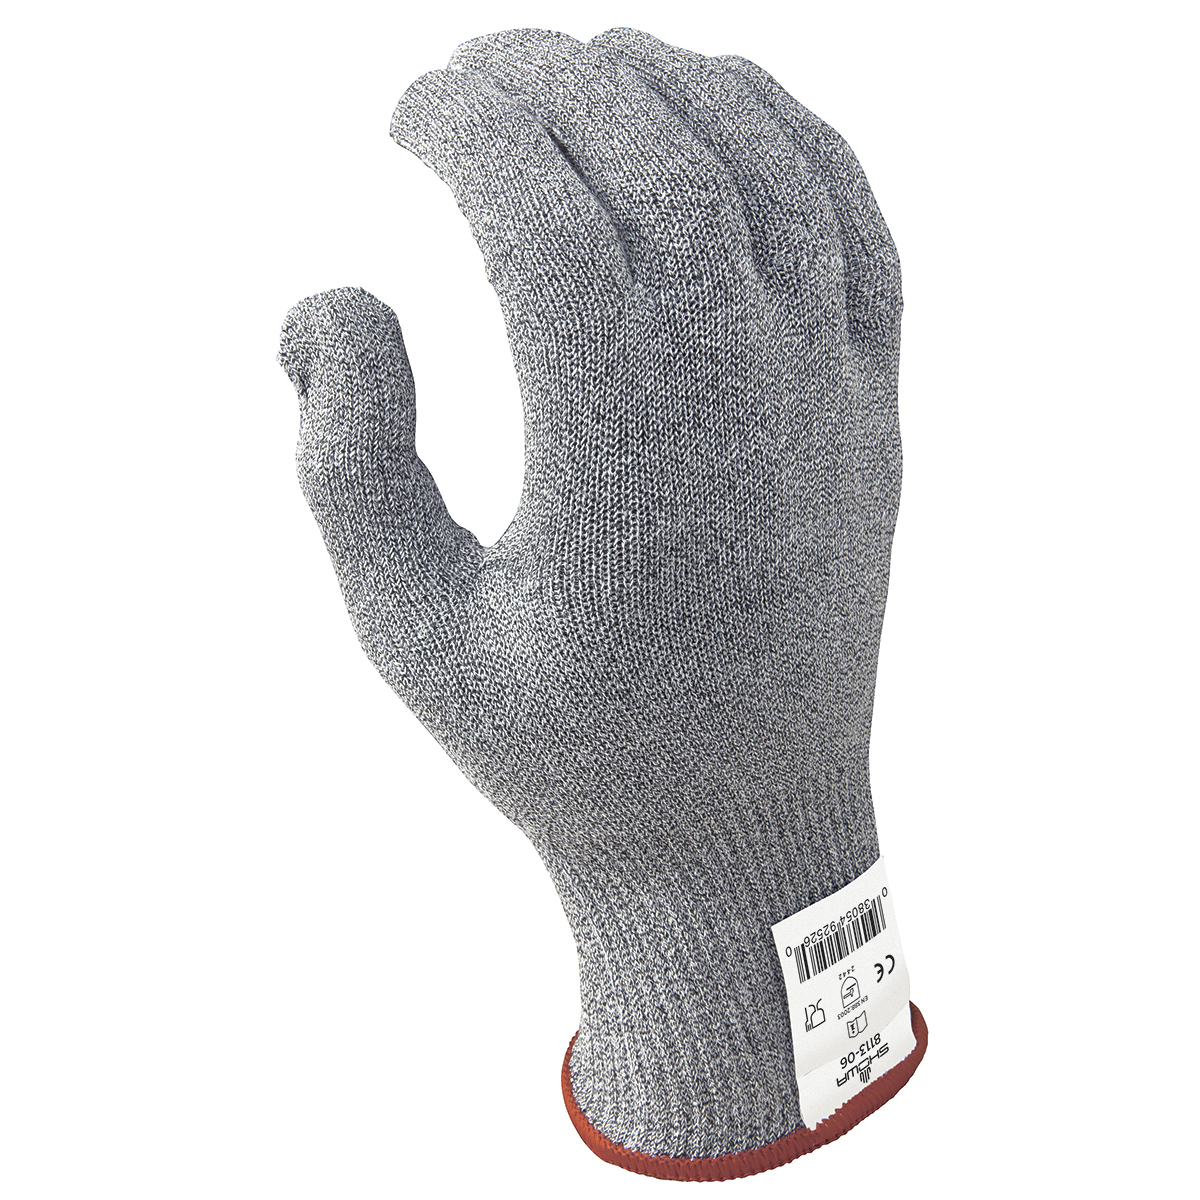 SHOWA® 8113 13 Gauge Glass Fiber And High Performance Polyethylene And Thermax® And Seamless Knit Cut Resistant Gloves